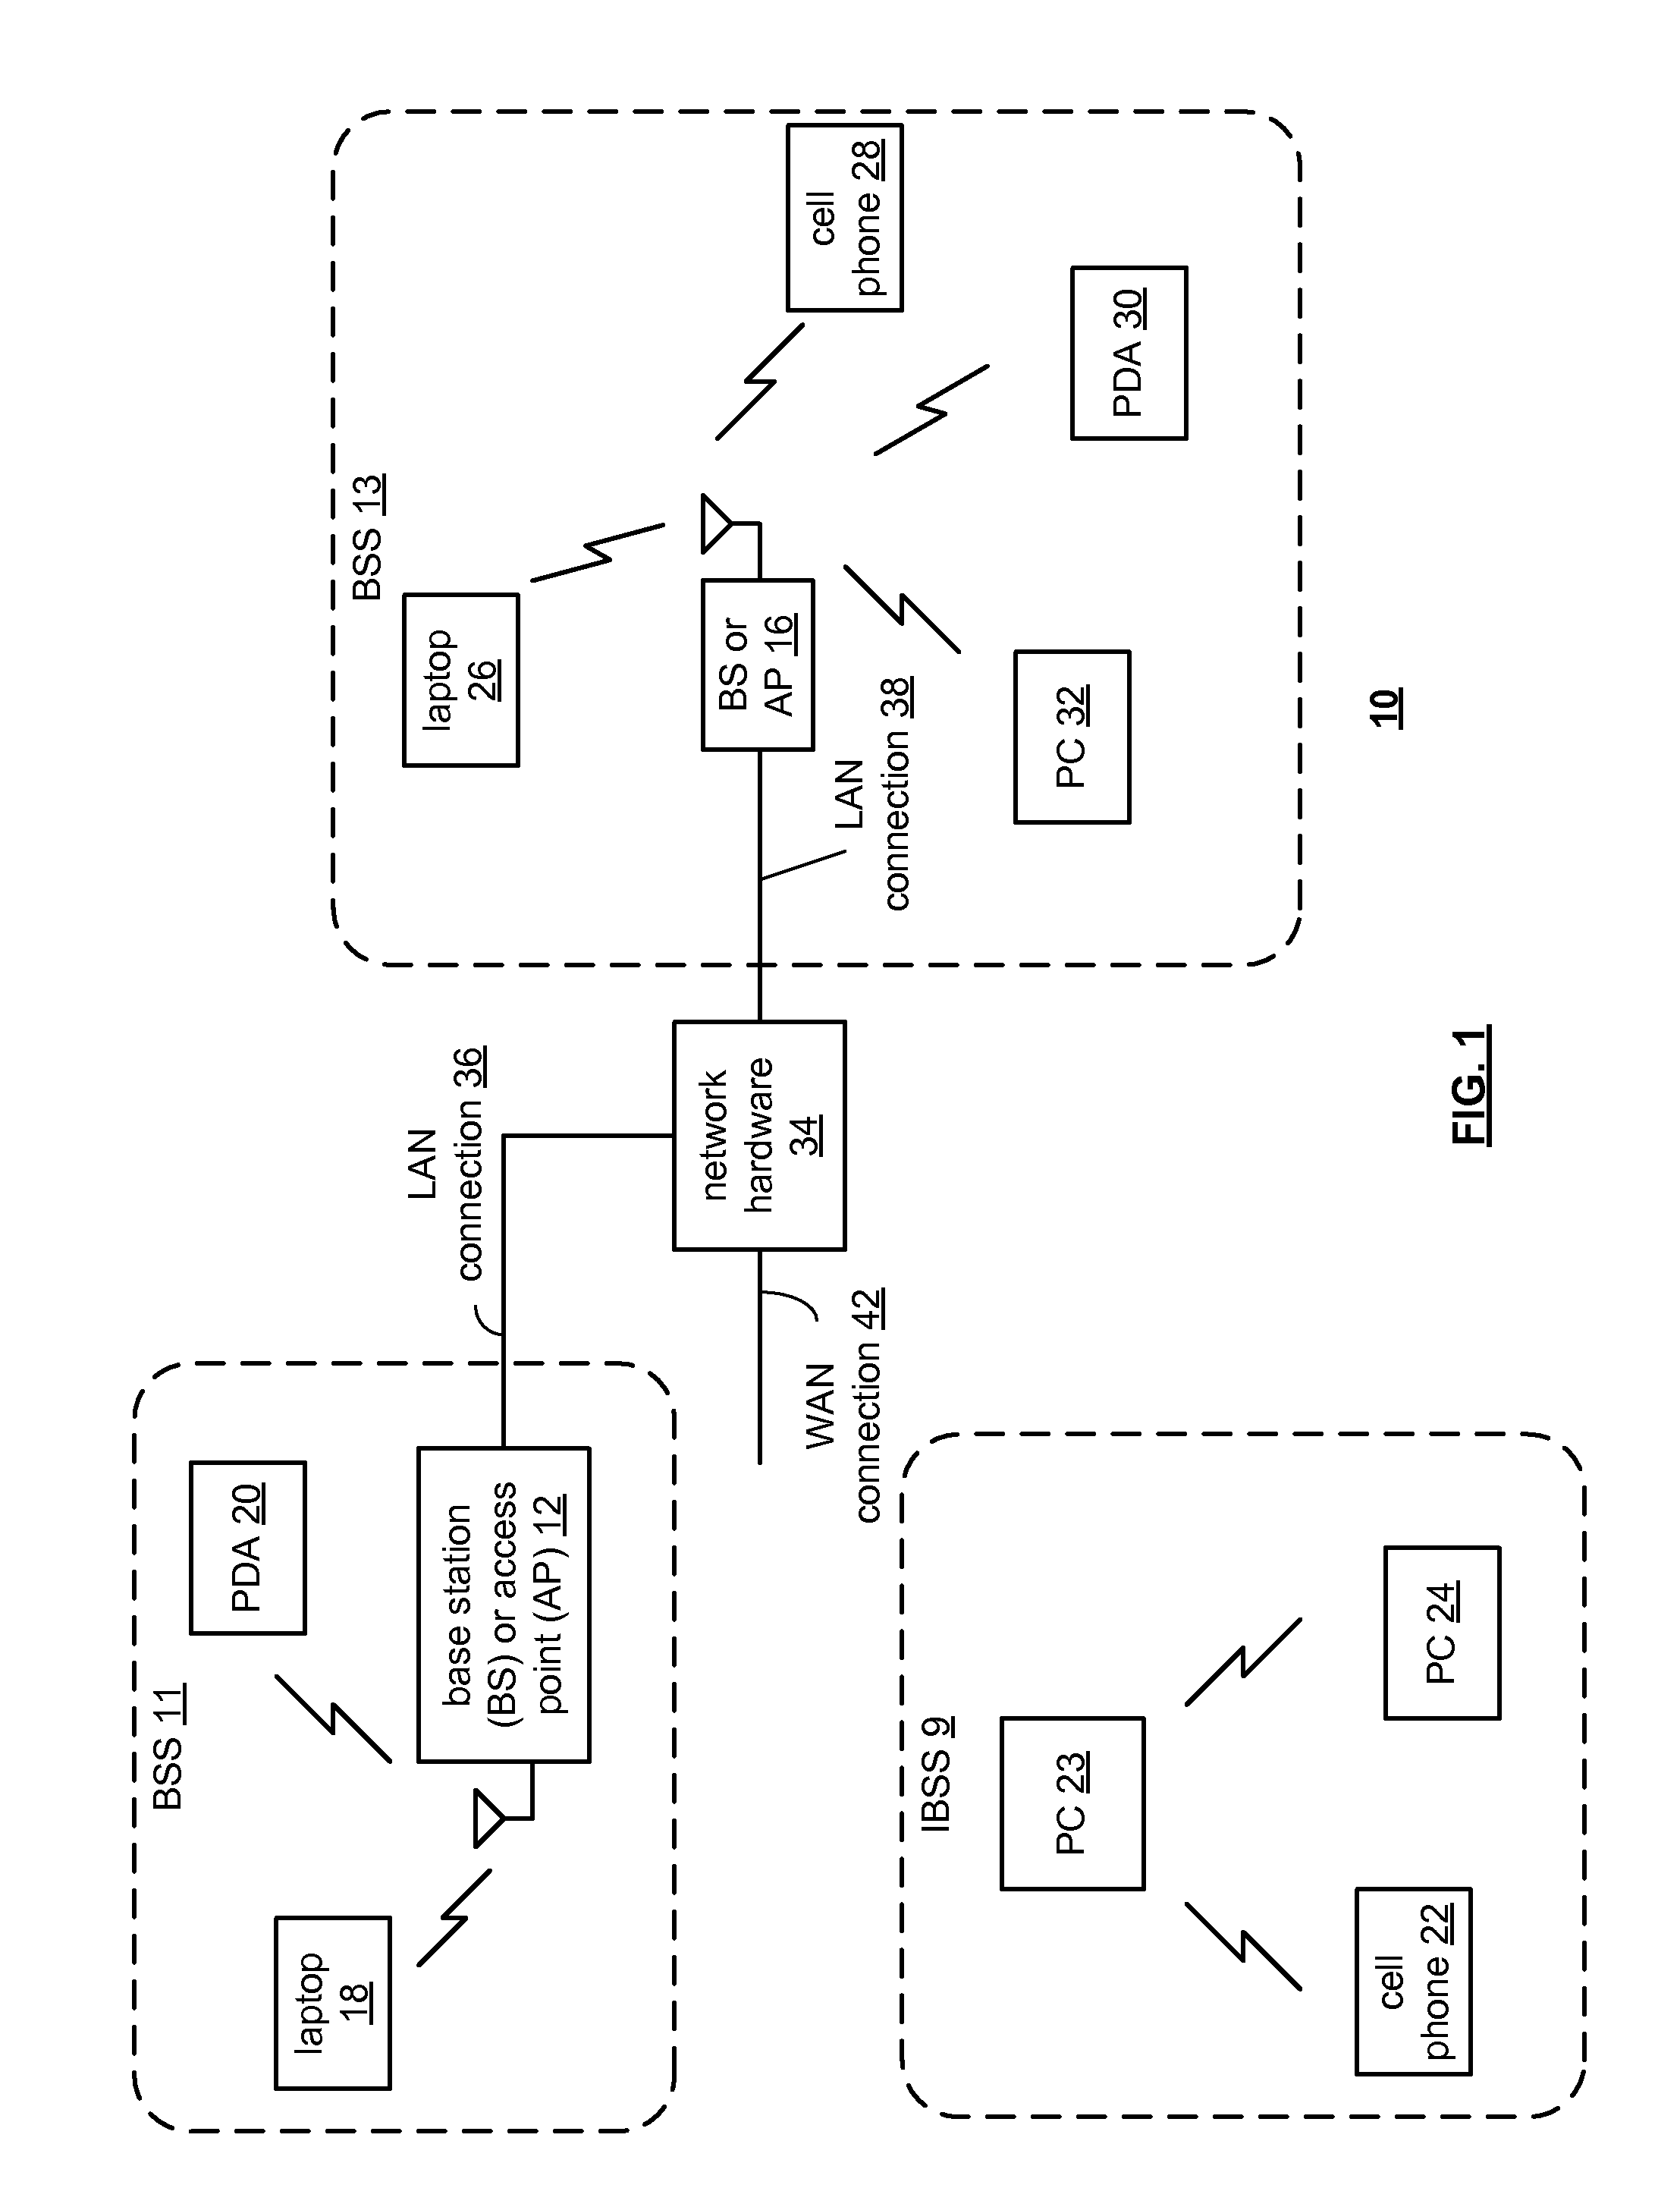 Integrated circuit with intra-chip and extra-chip RF communication